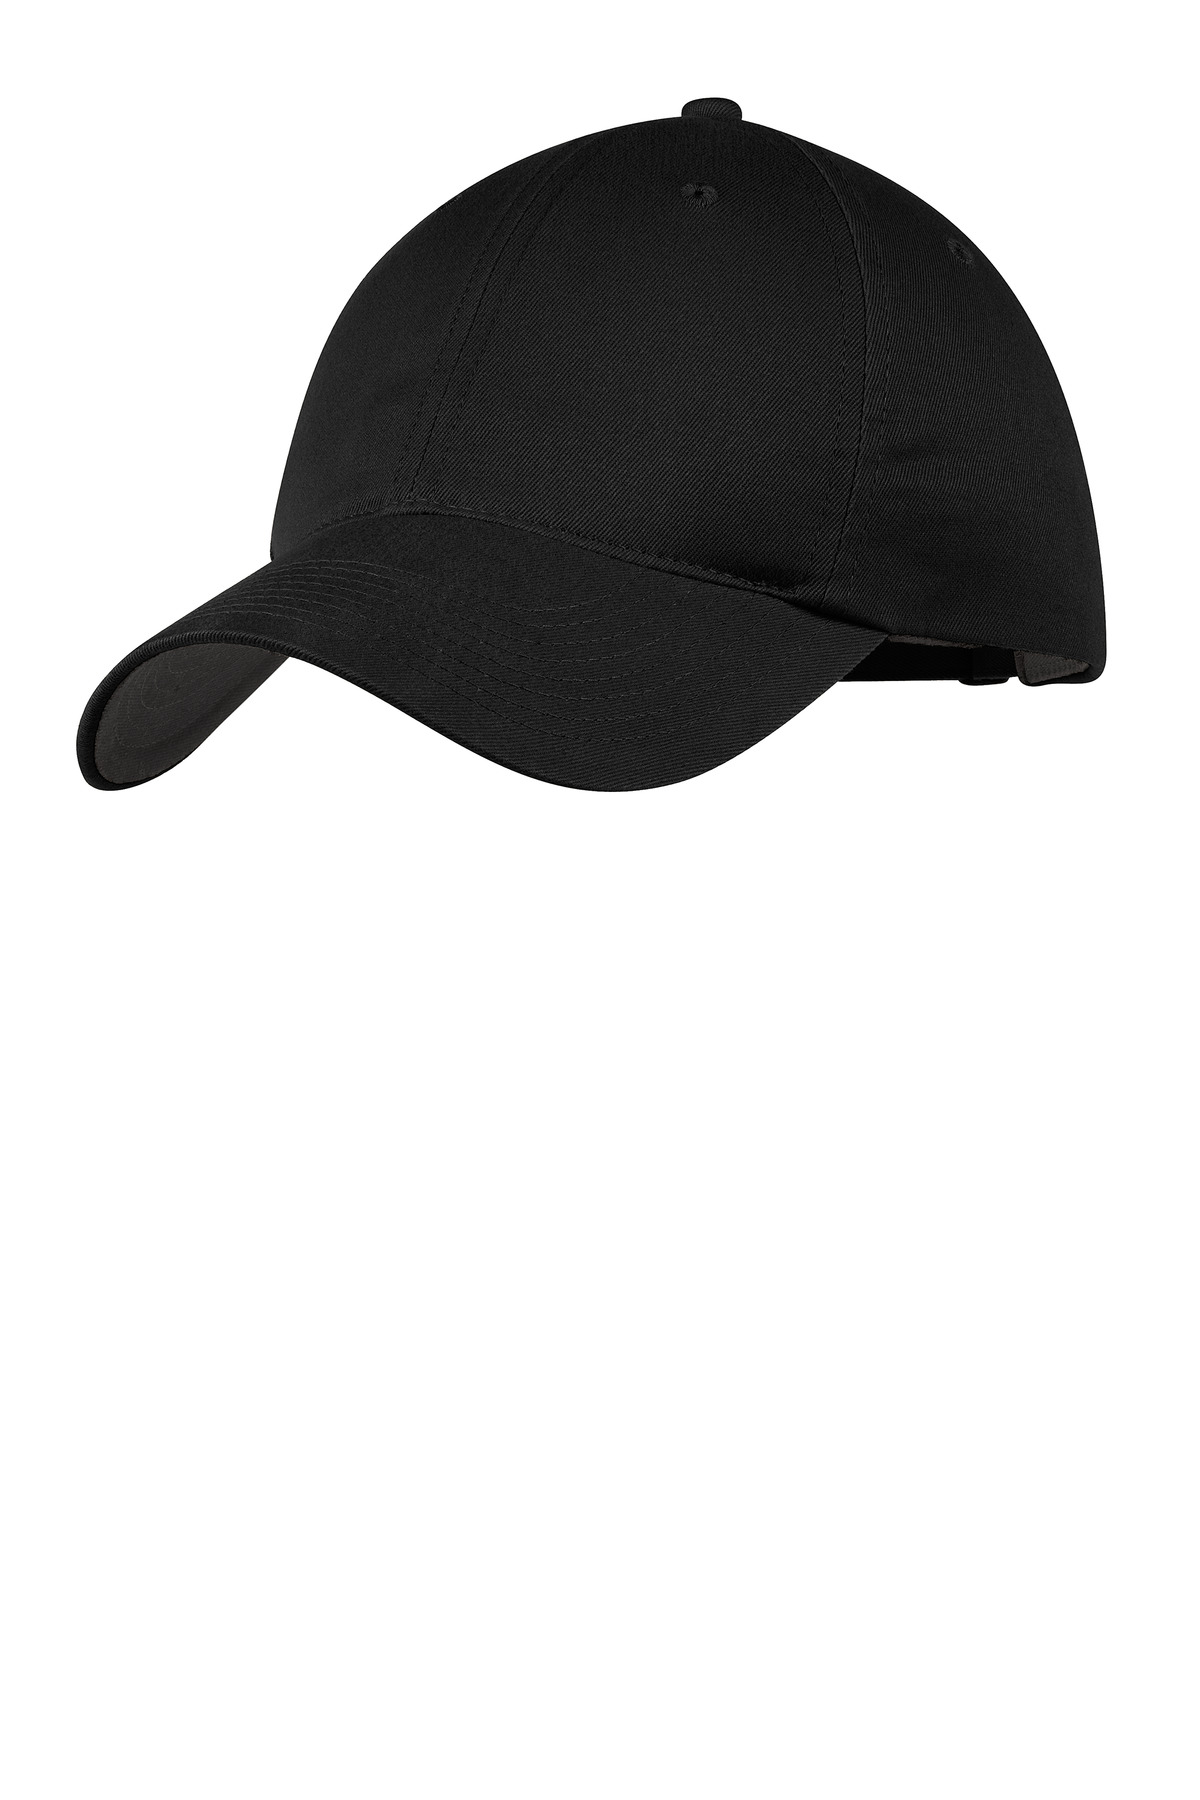 Nike Unstructured Cotton/Poly Twill Cap-